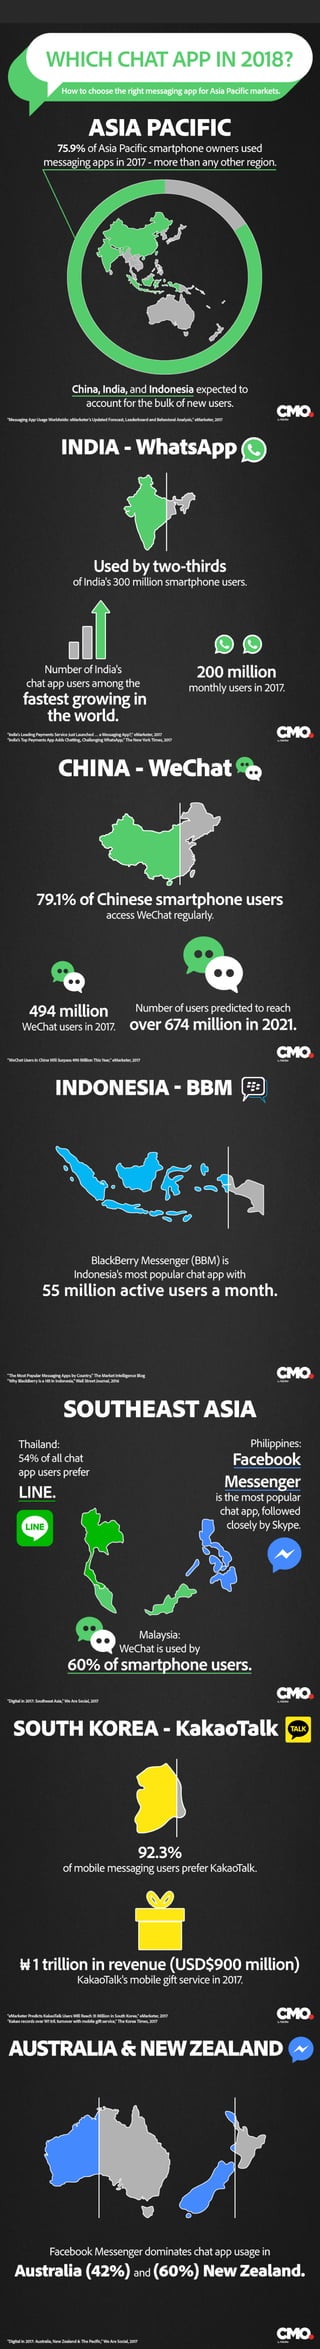 CMO.com: APAC Gets The Chat-App Message